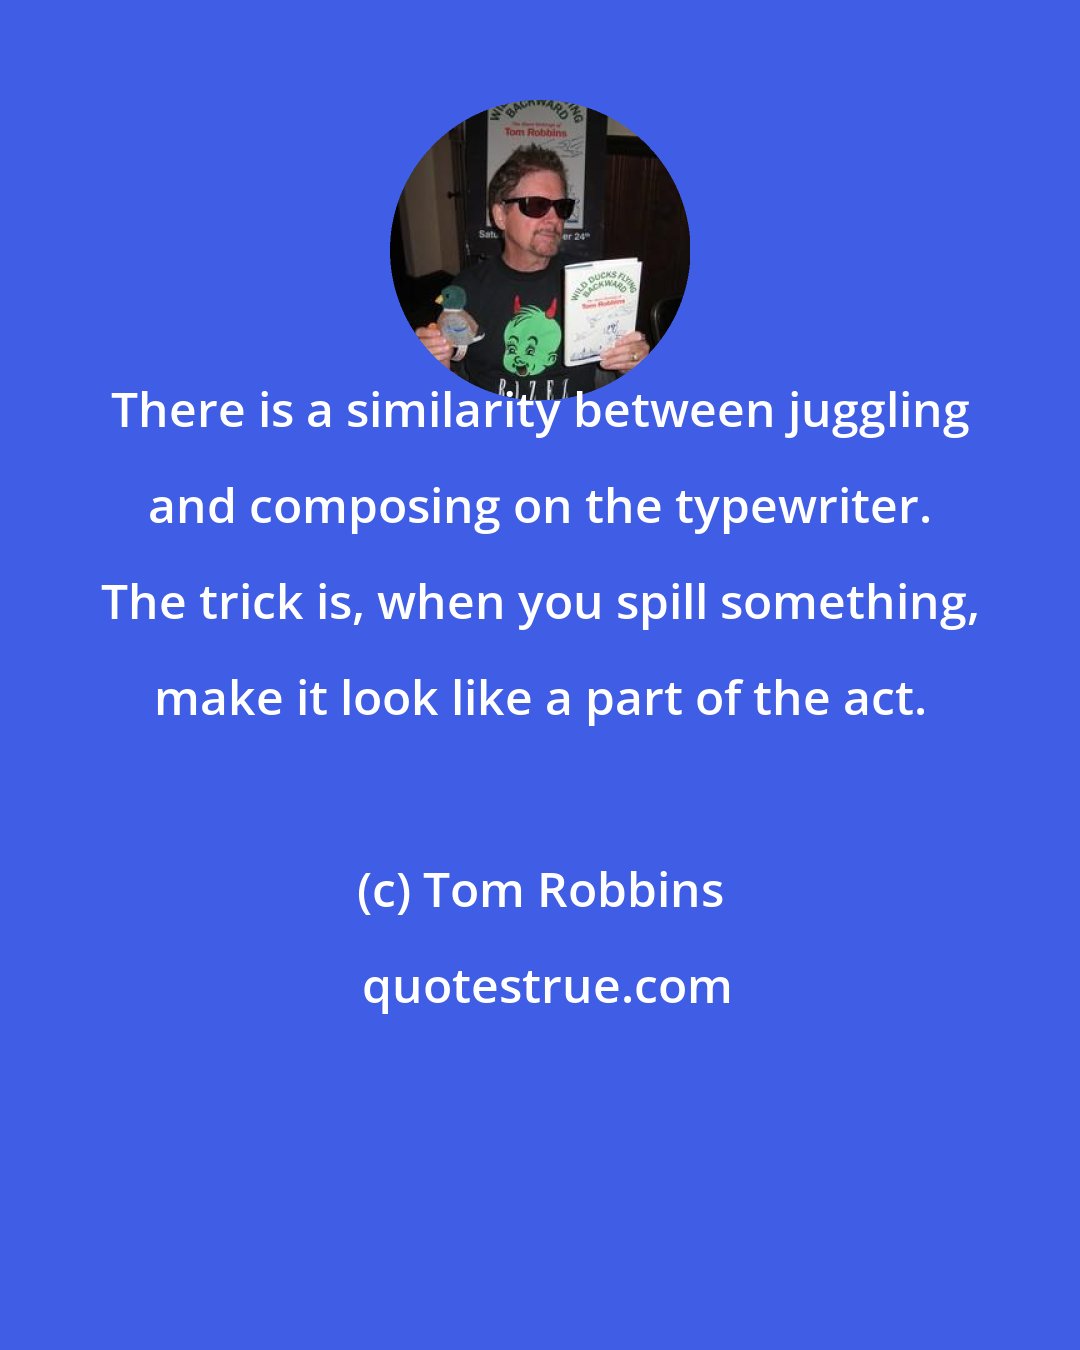 Tom Robbins: There is a similarity between juggling and composing on the typewriter. The trick is, when you spill something, make it look like a part of the act.